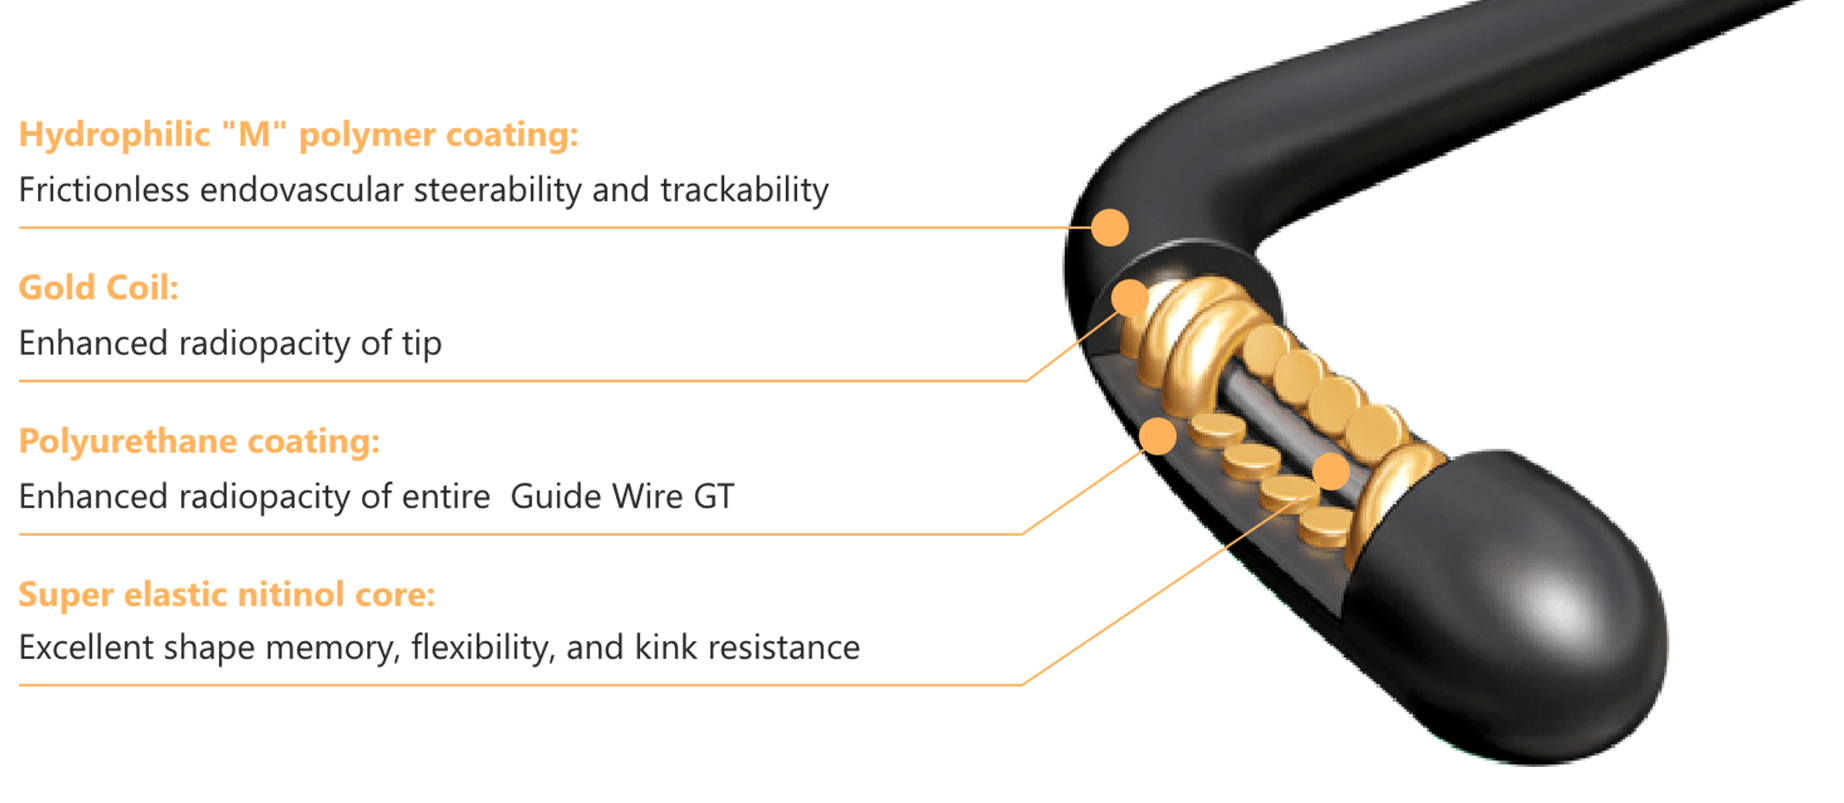 RADIFOCUS™ Guide Wire GT with gold coil (image)